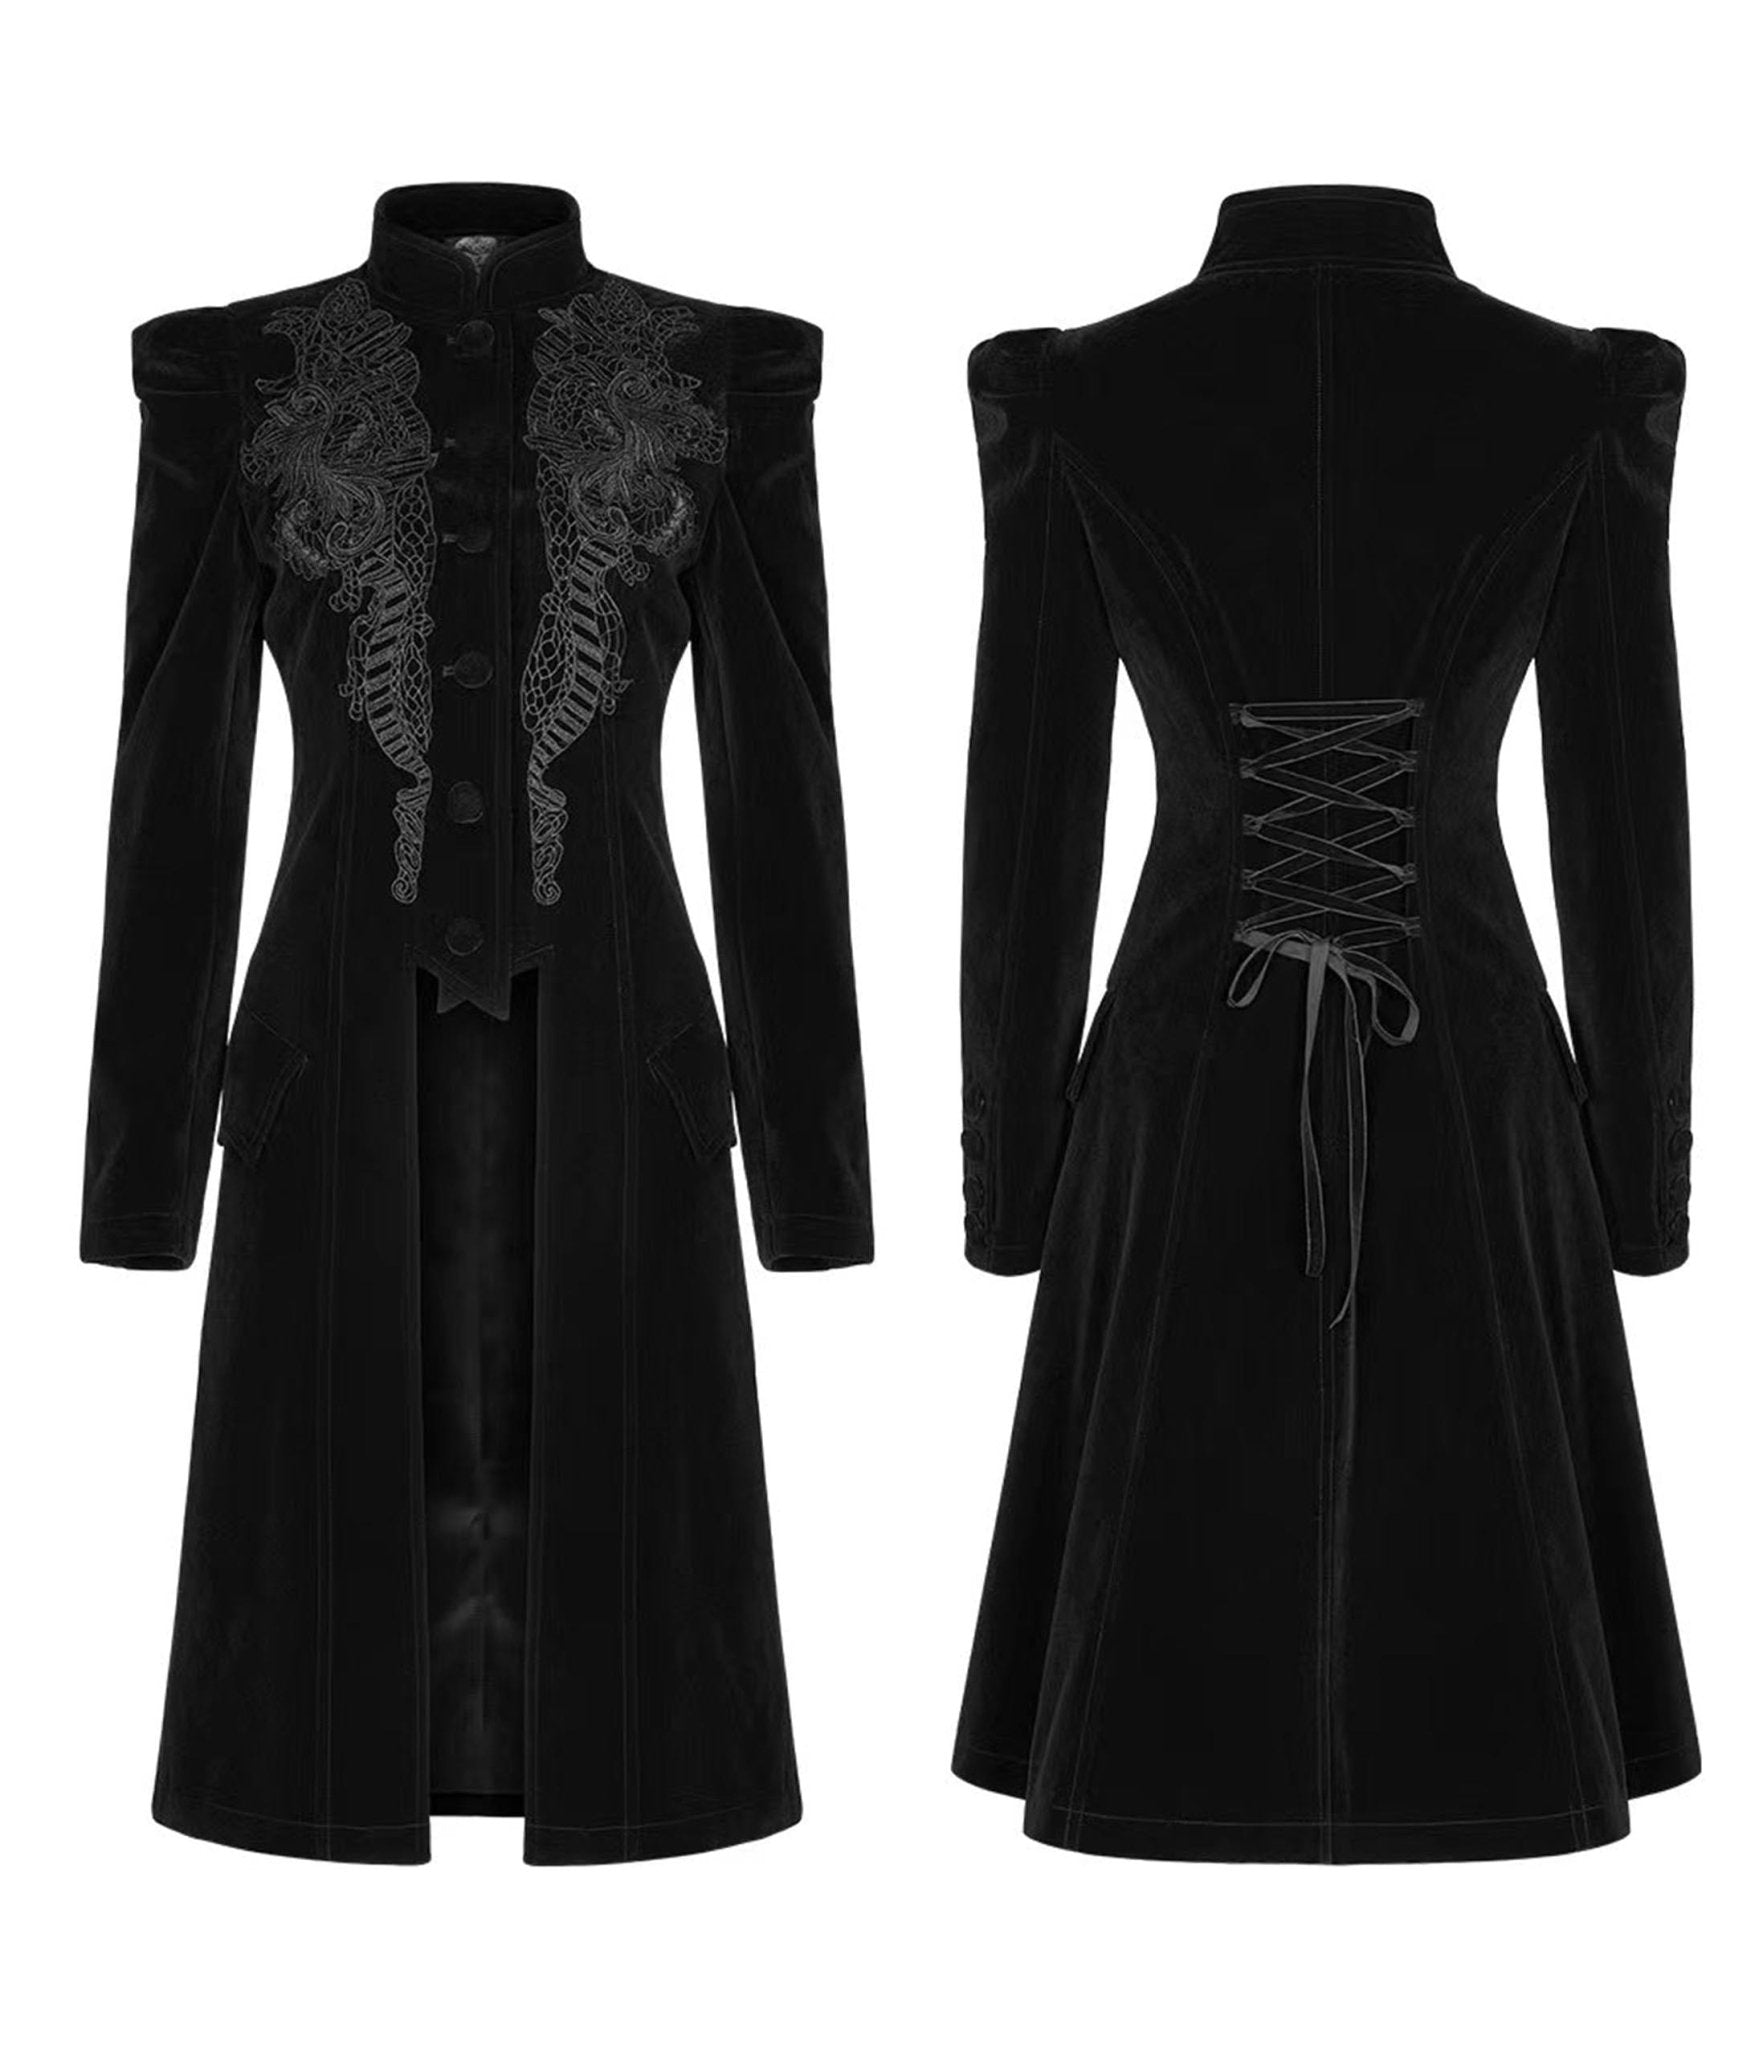 Women's Black Leather Coat, Red Lace Sheath Dress, Black Fringe Suede Ankle  Boots, Black Wool Tights